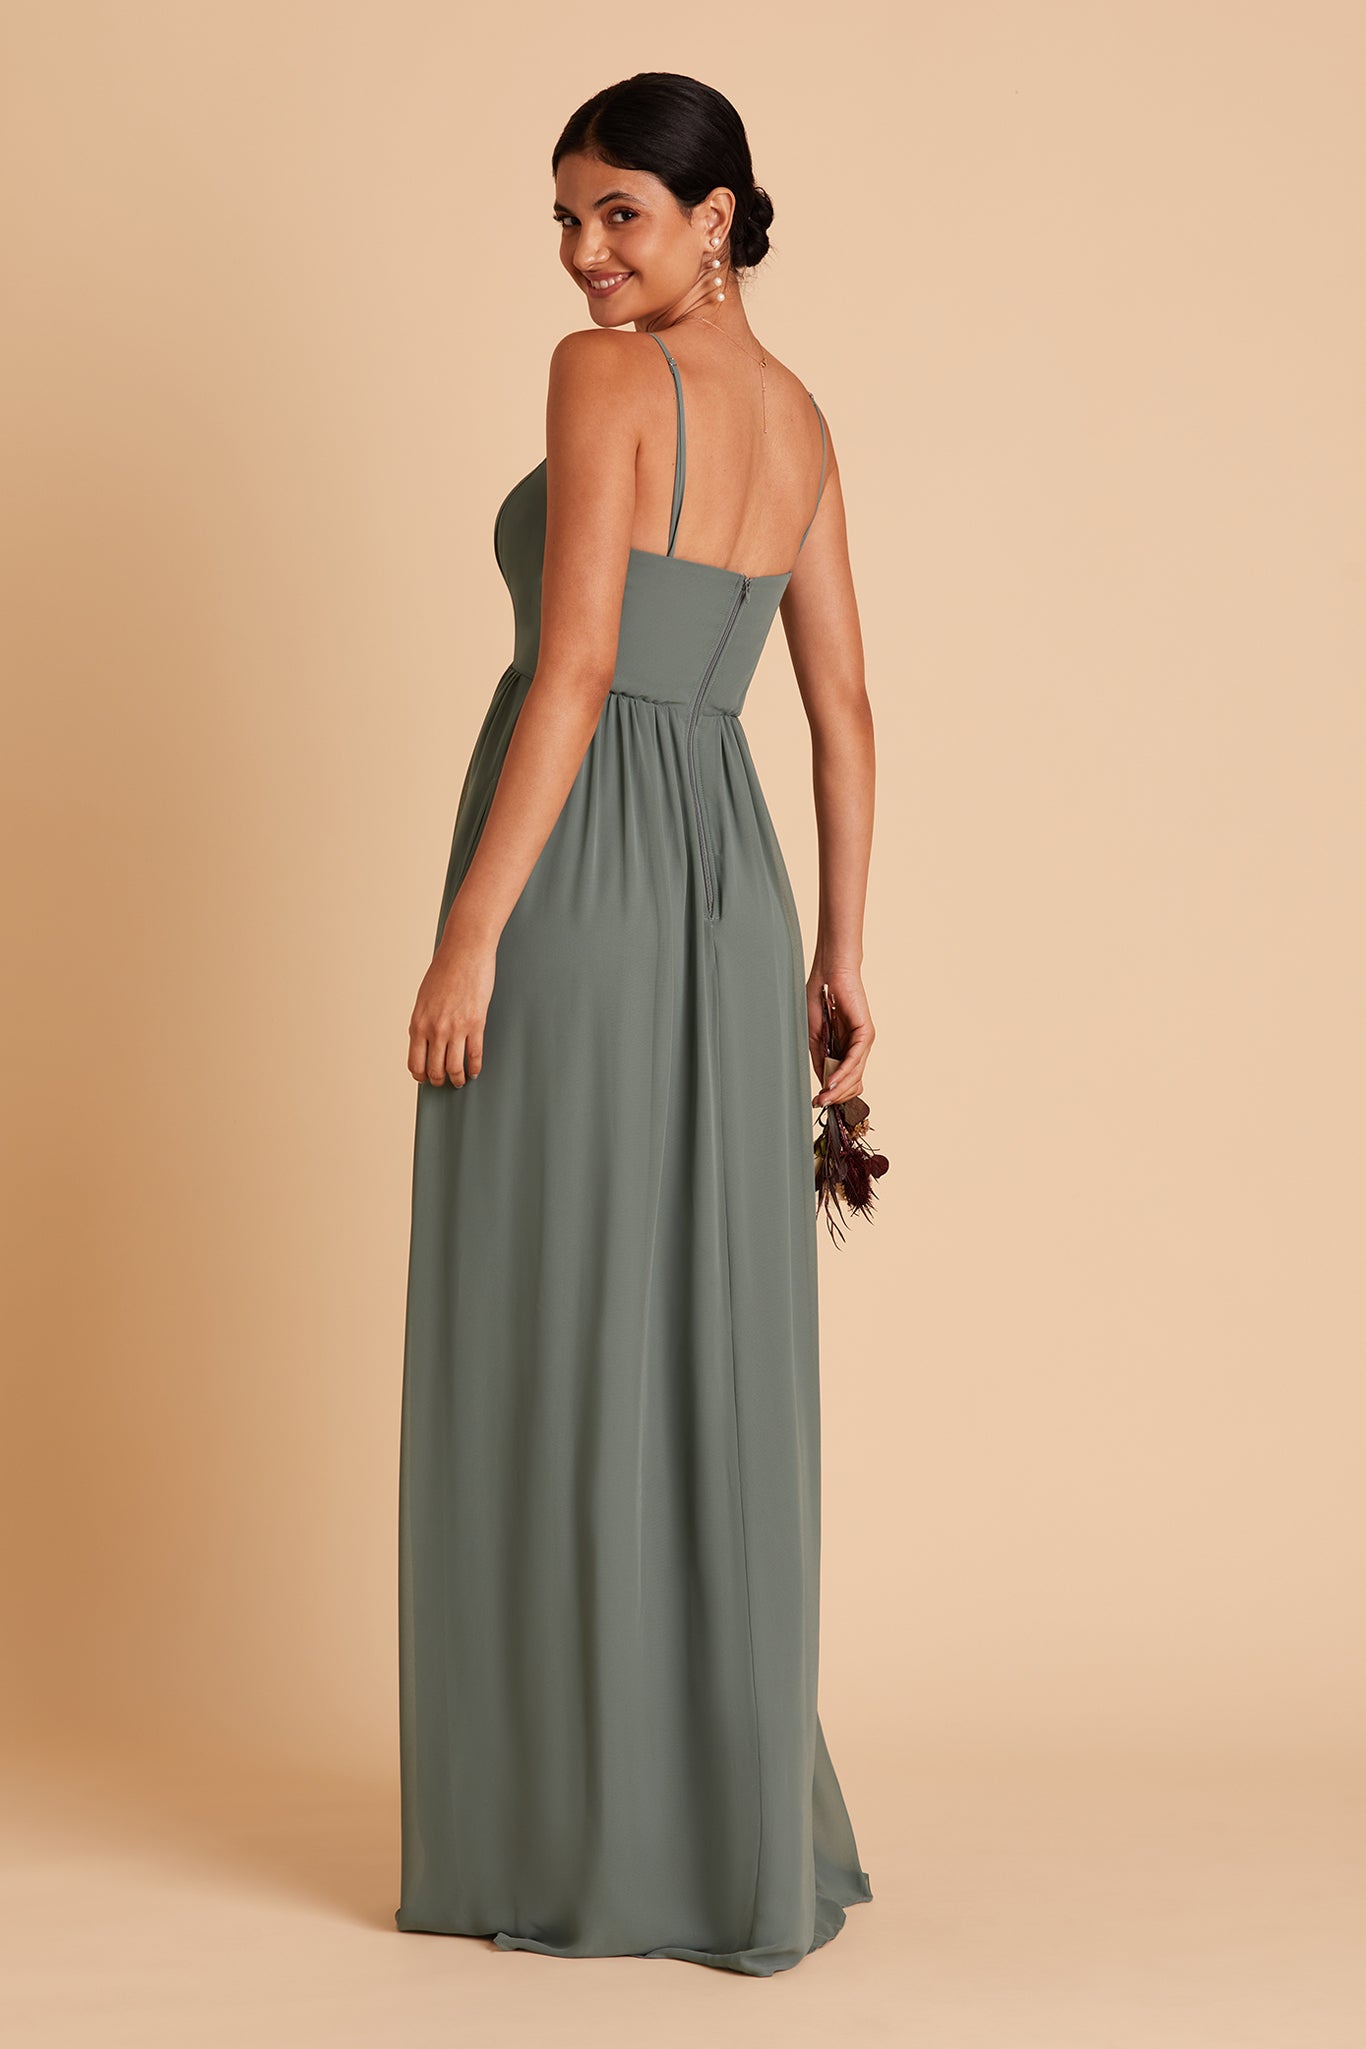 August bridesmaid dress with slit in sea glass chiffon by Birdy Grey, back view